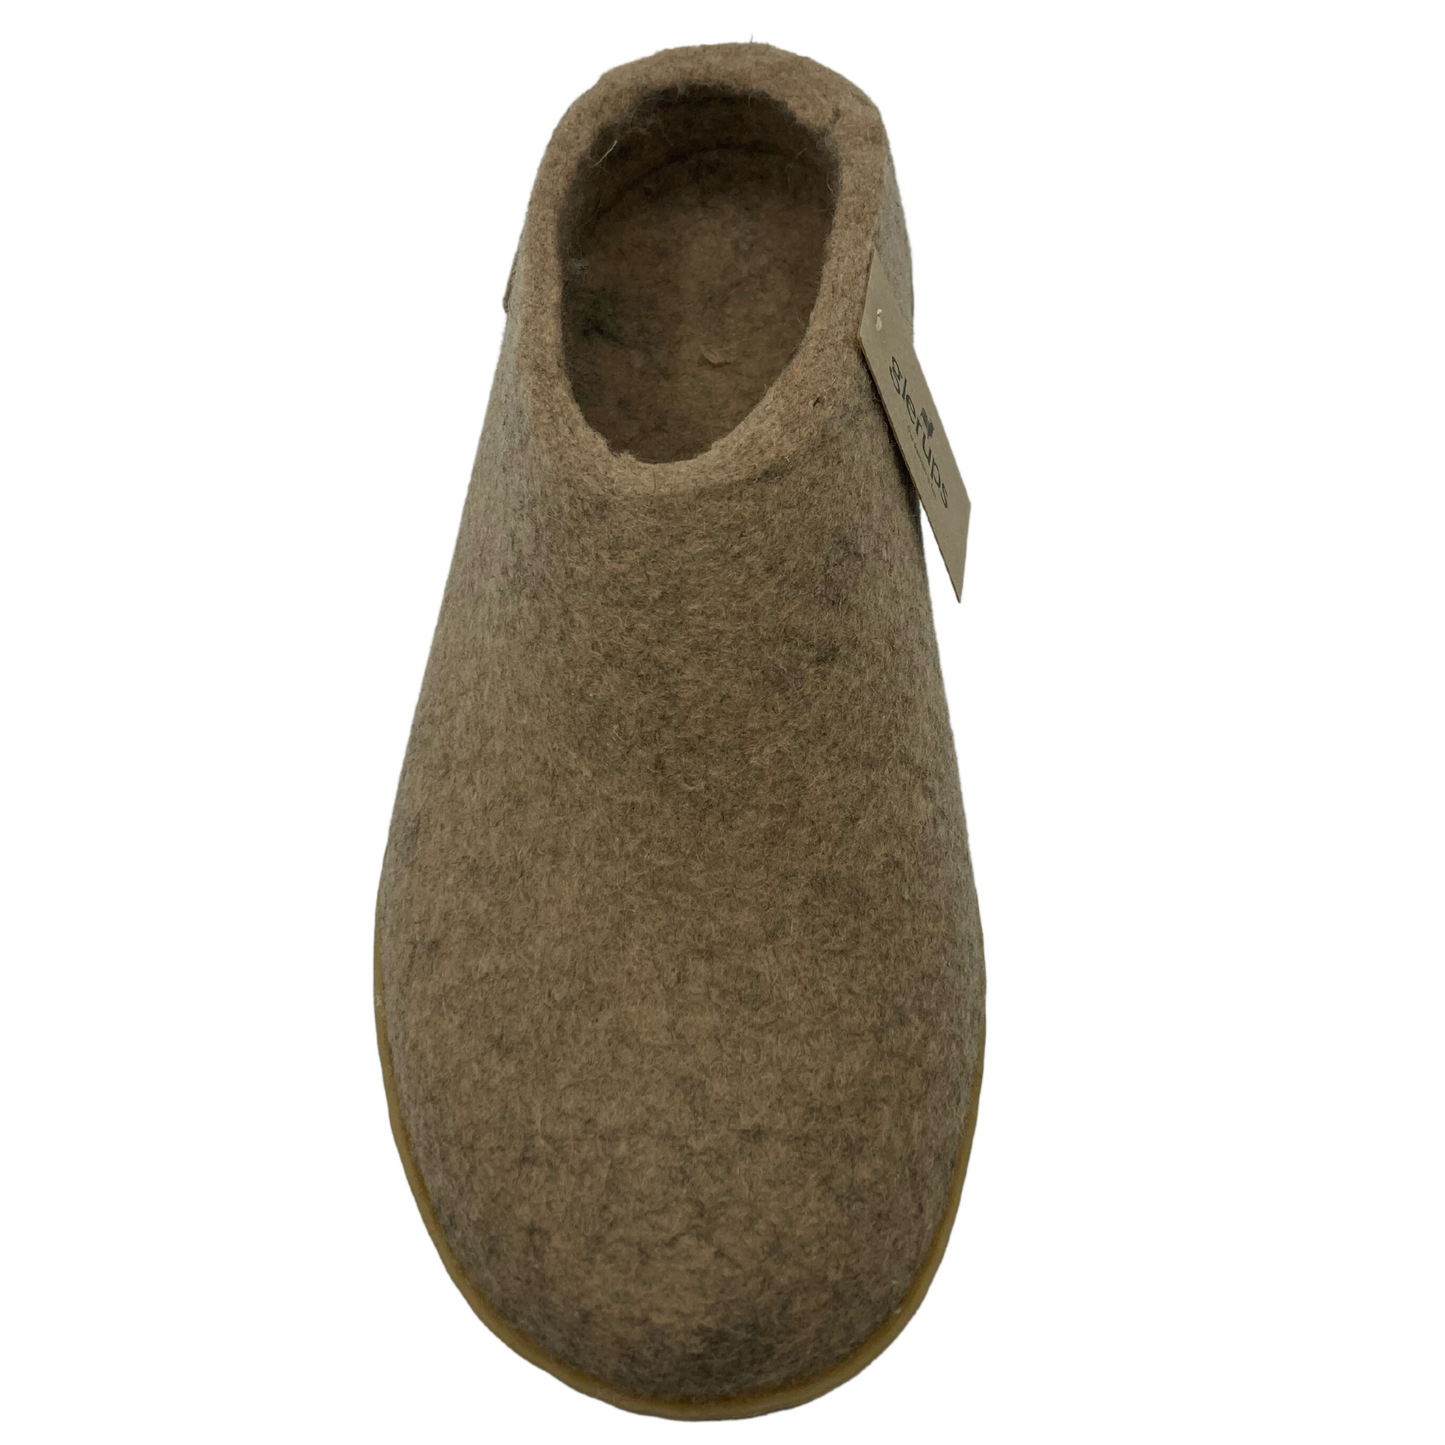 Top view of felted wool slip on shoe with rounded toe and brown rubber outsole